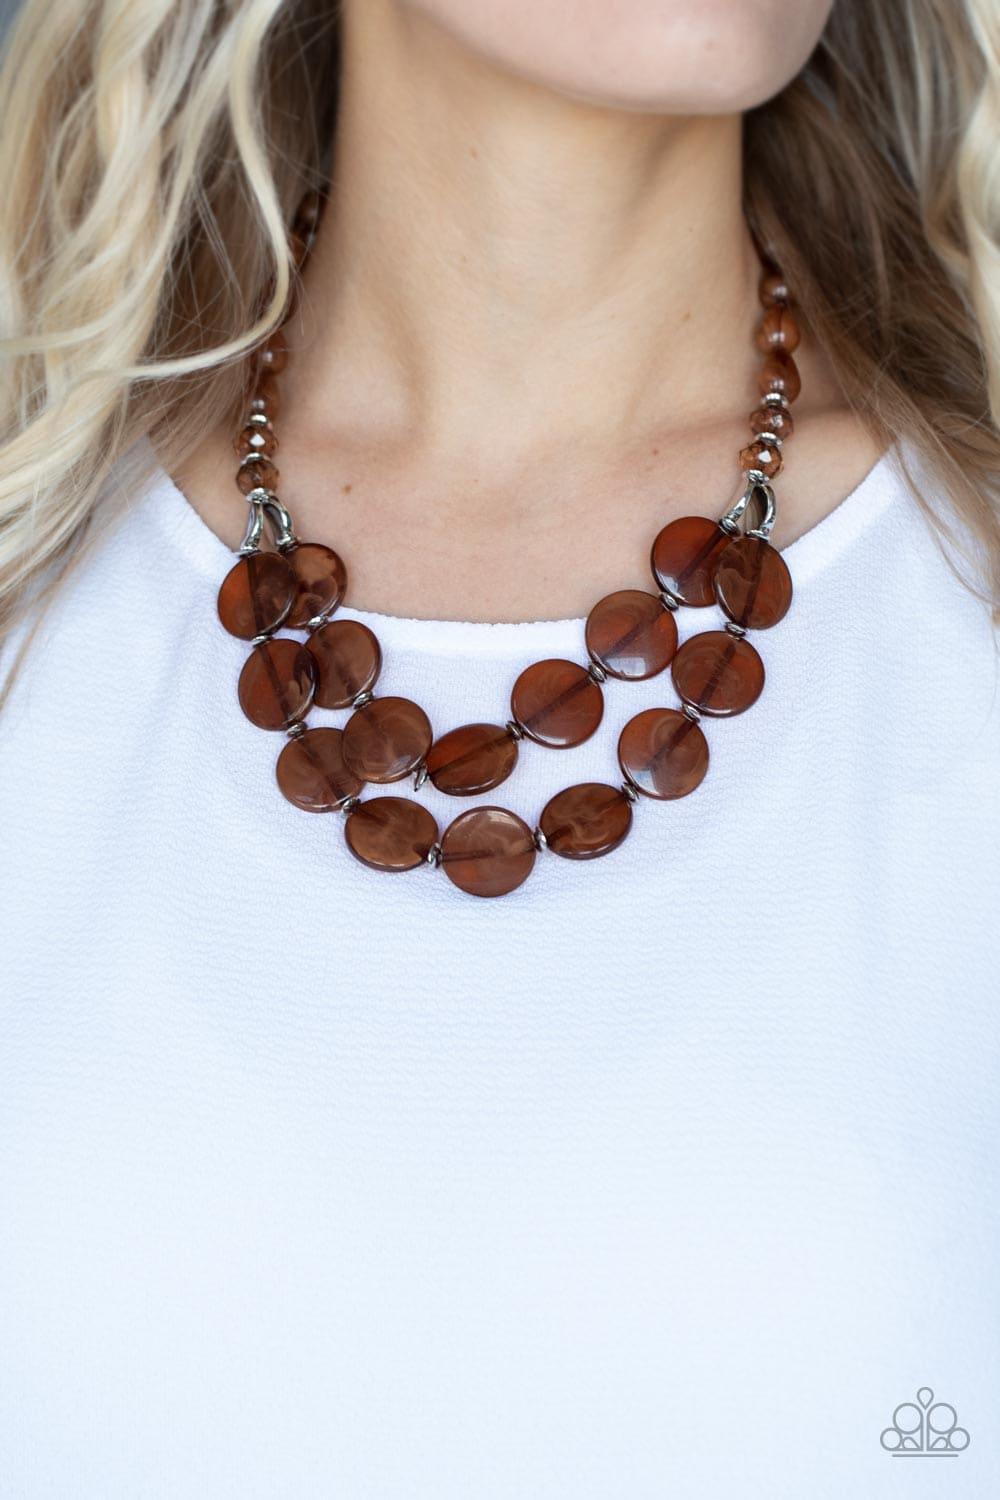 Paparazzi Accessories - Beach Day Demure - Brown Necklace - Bling by JessieK